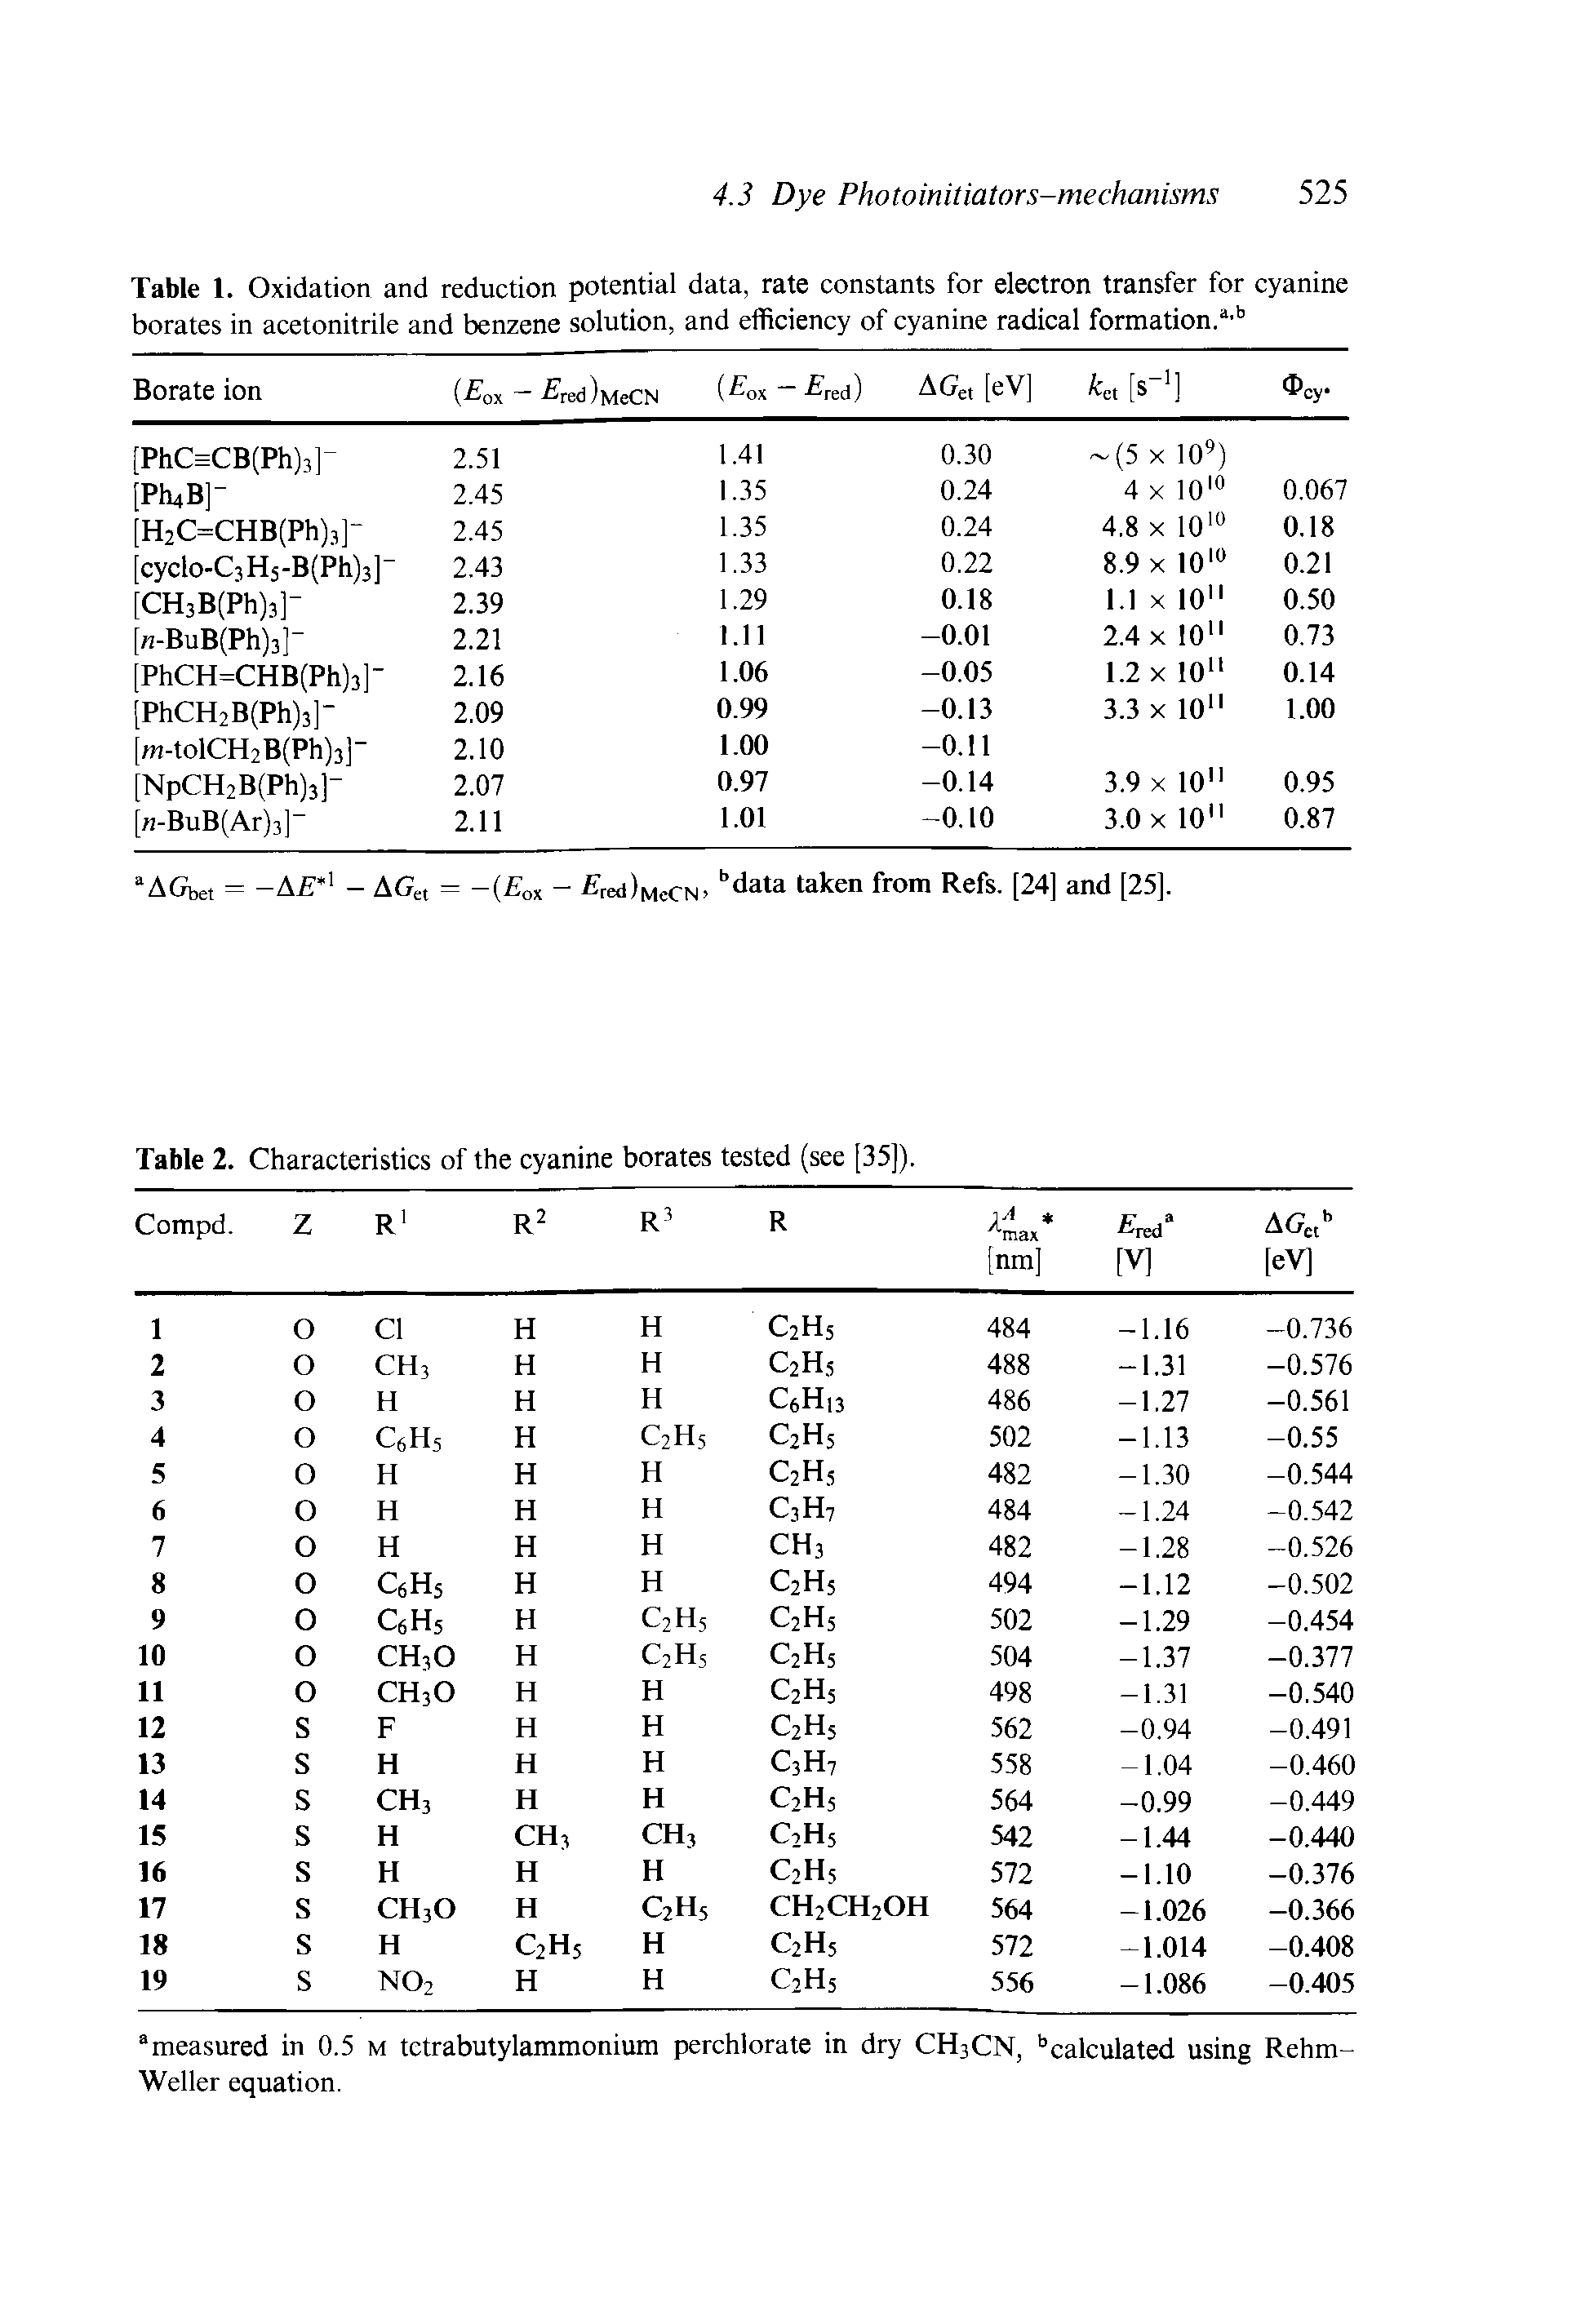 Table 1. Oxidation and reduction potential data, rate constants for electron transfer for cyanine borates in acetonitrile and benzene solution, and efficiency of cyanine radical formation.